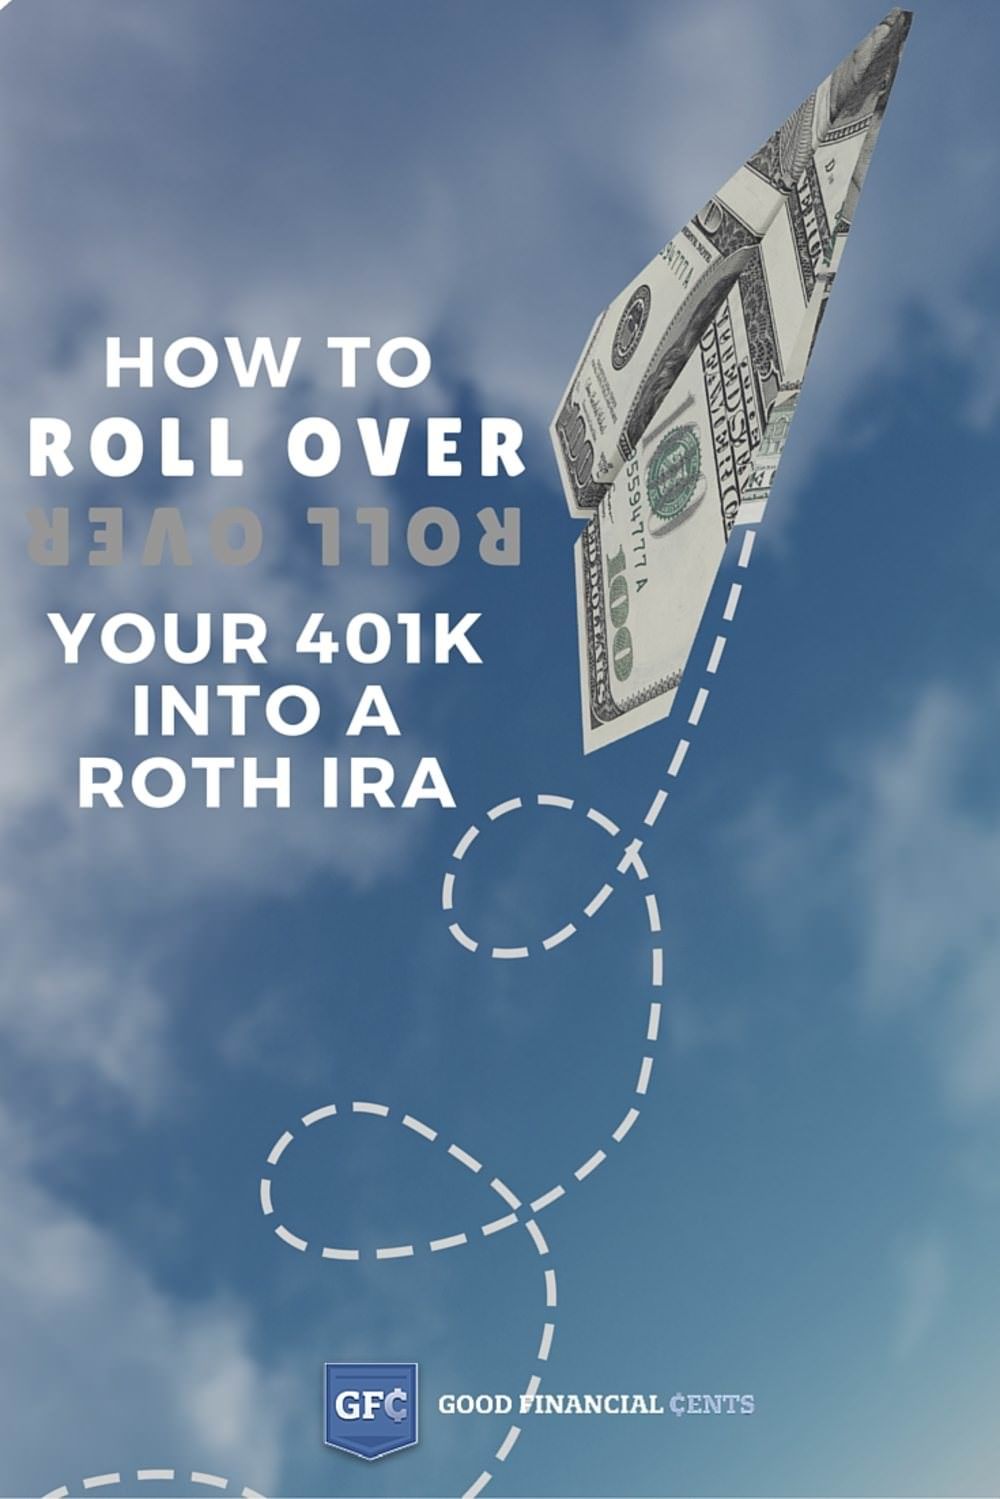 Income Limits For Rollover To Roth Ira